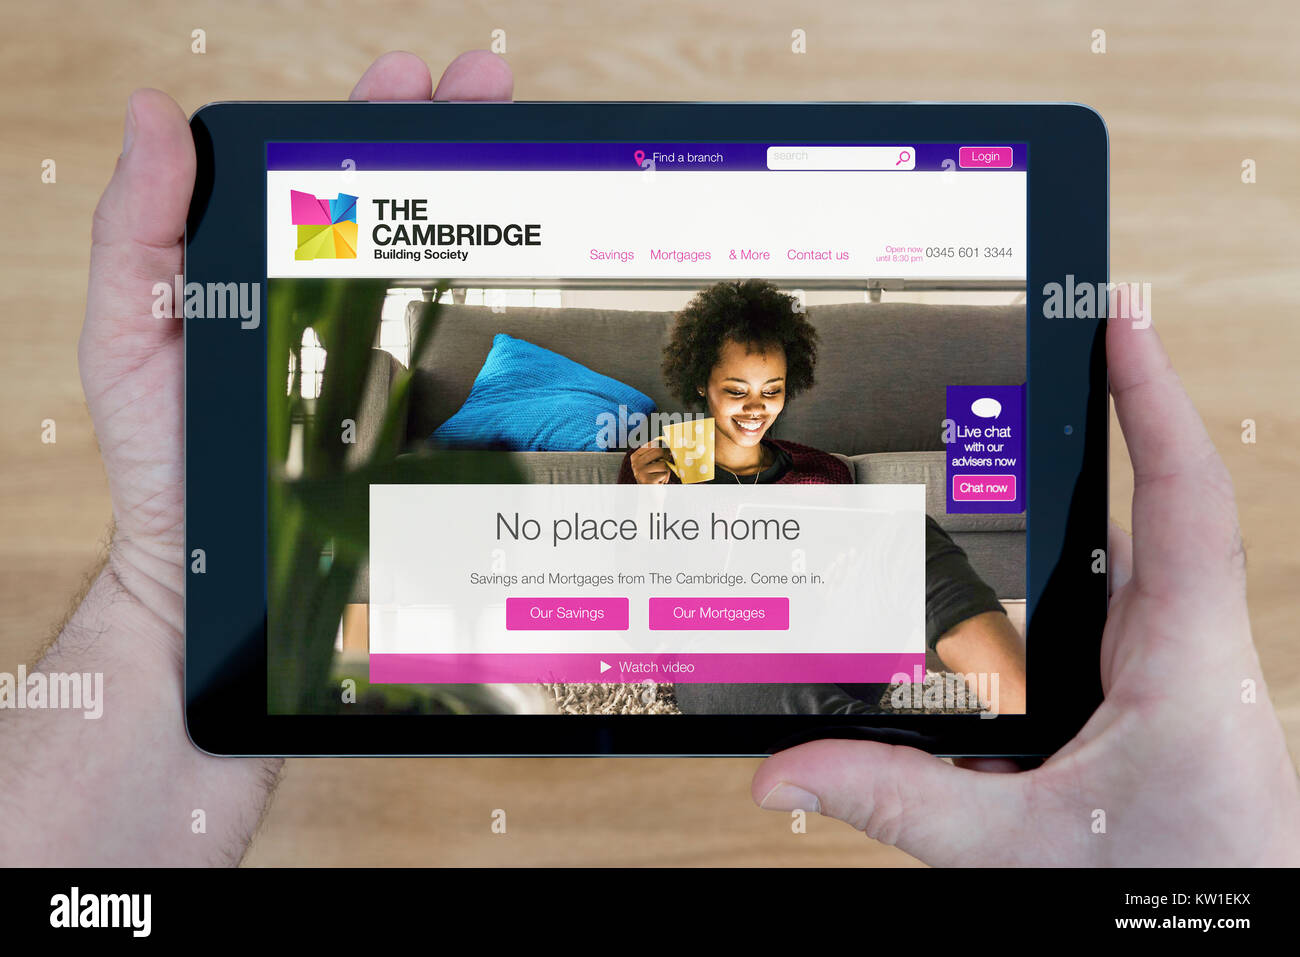 A man looks at the Cambridge Building Society website on his iPad tablet device, shot against a wooden table top background (Editorial use only) Stock Photo